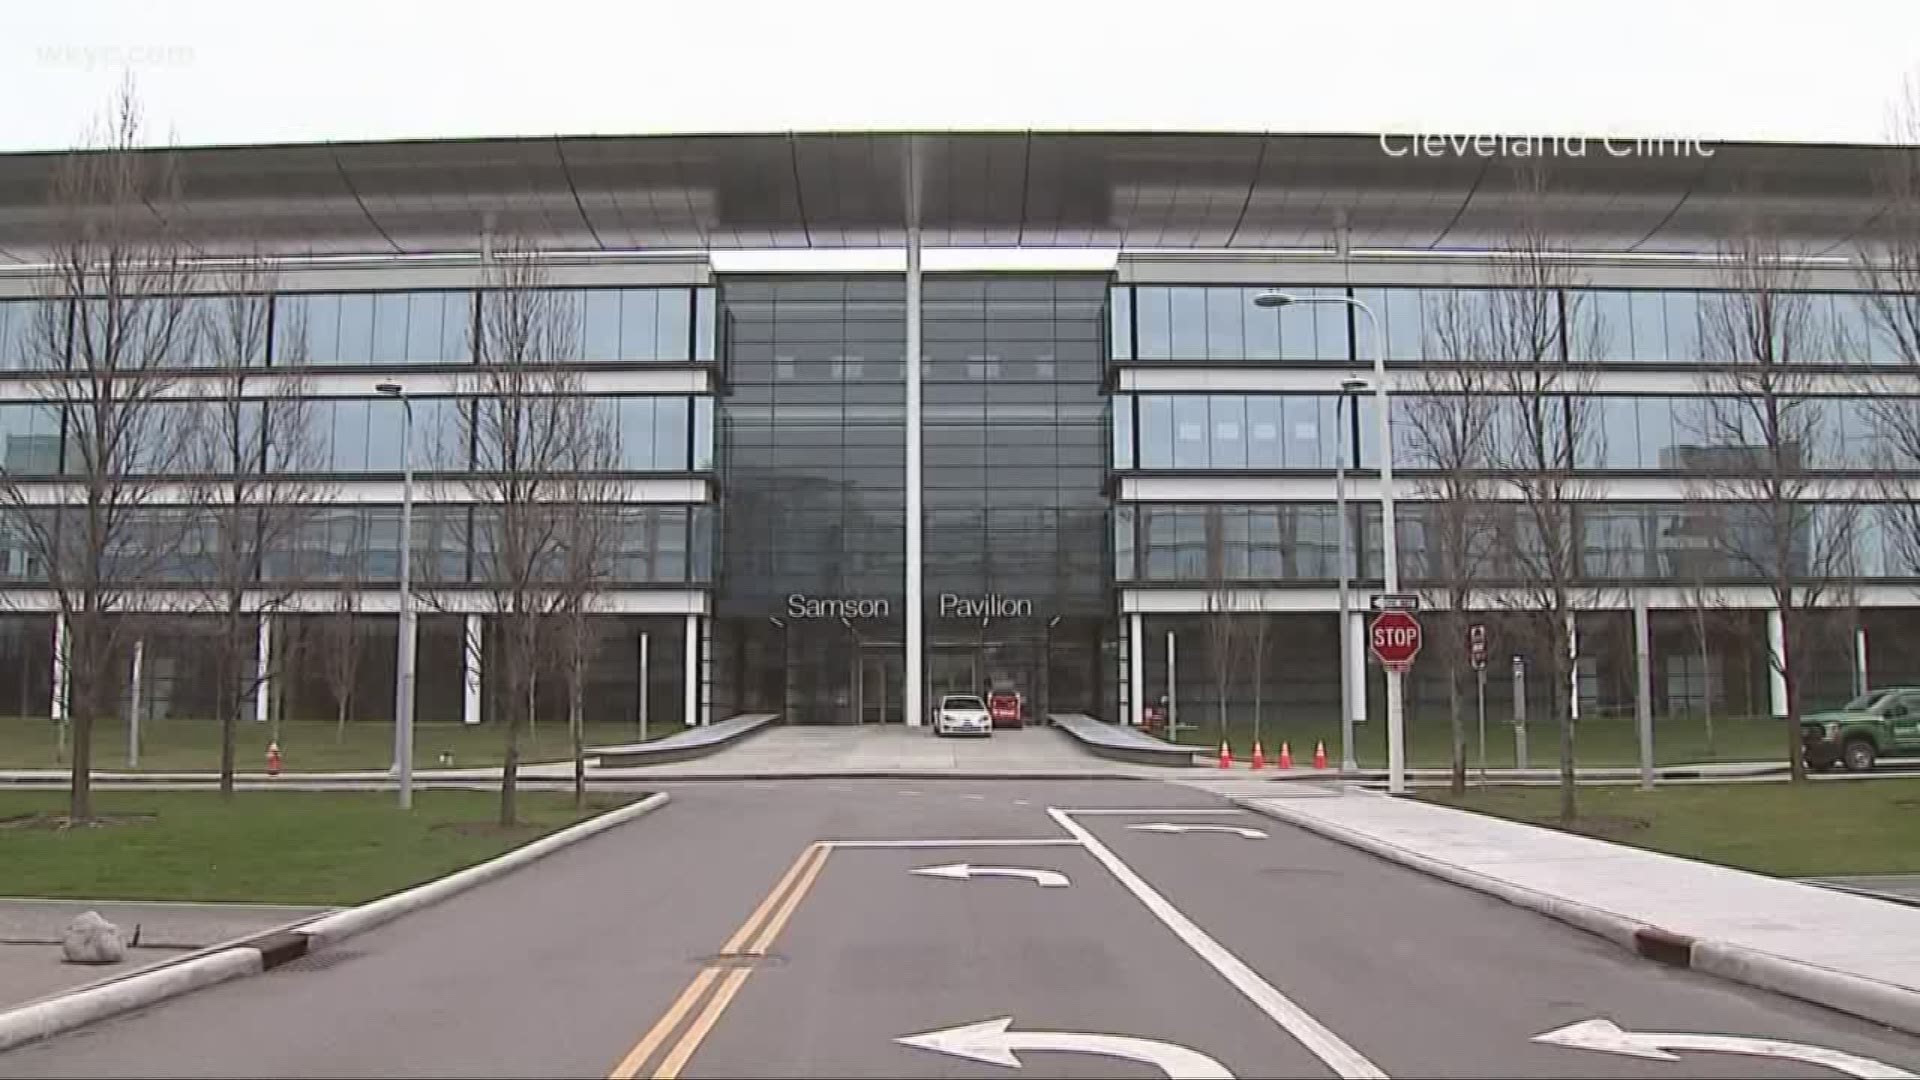 As the number of COVID-19 cases continue to climb here in Ohio, there may be a need for more hospital space. The Cleveland Clinic says they have a plan.